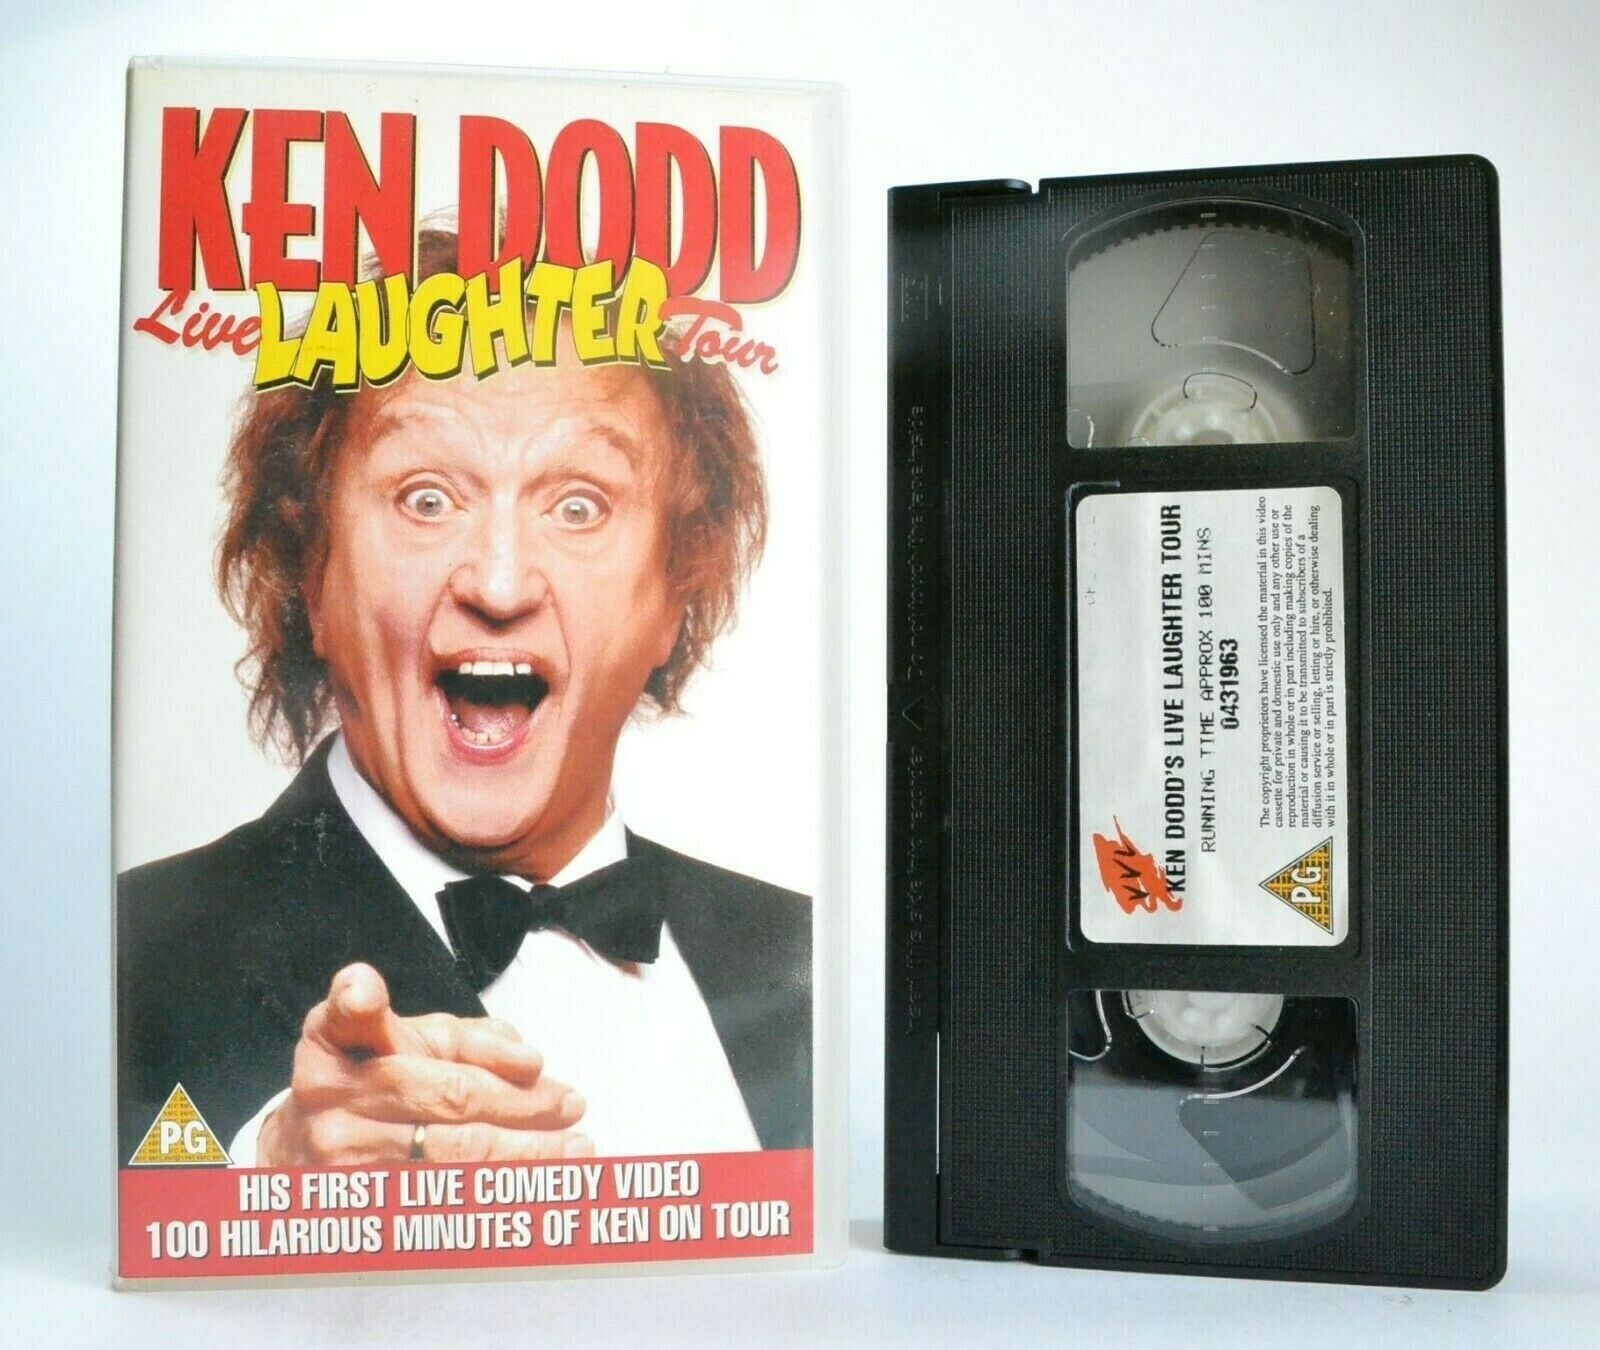 Ken Dodd: Live Laughter Tour - Stand-Up - Classic Comedy Routines - Pal VHS-